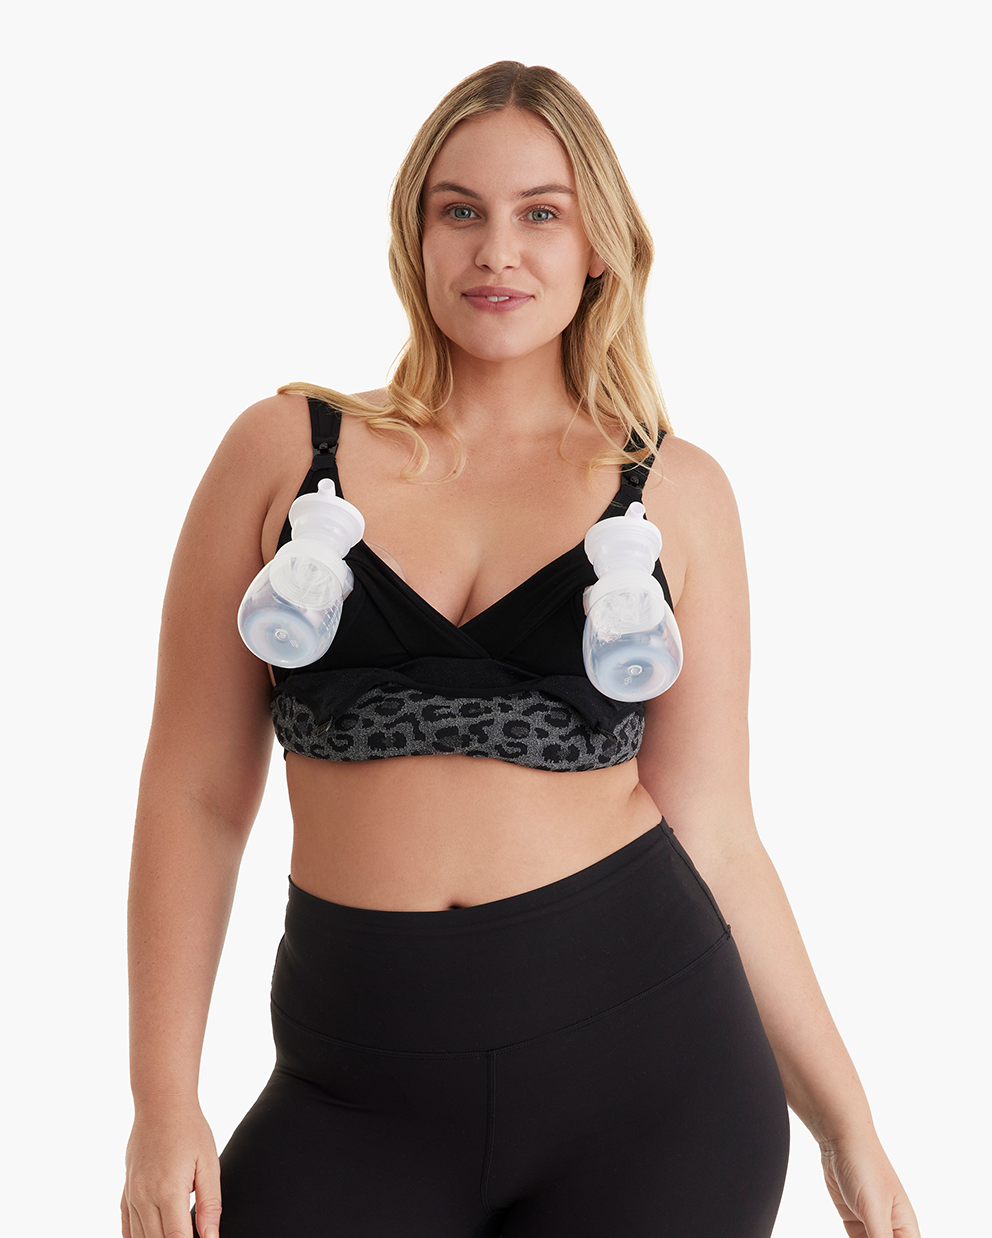 Momcozy on LinkedIn: The Perfect Plus-size, Soft Pumping Bra: Introducing  the Momcozy HF018